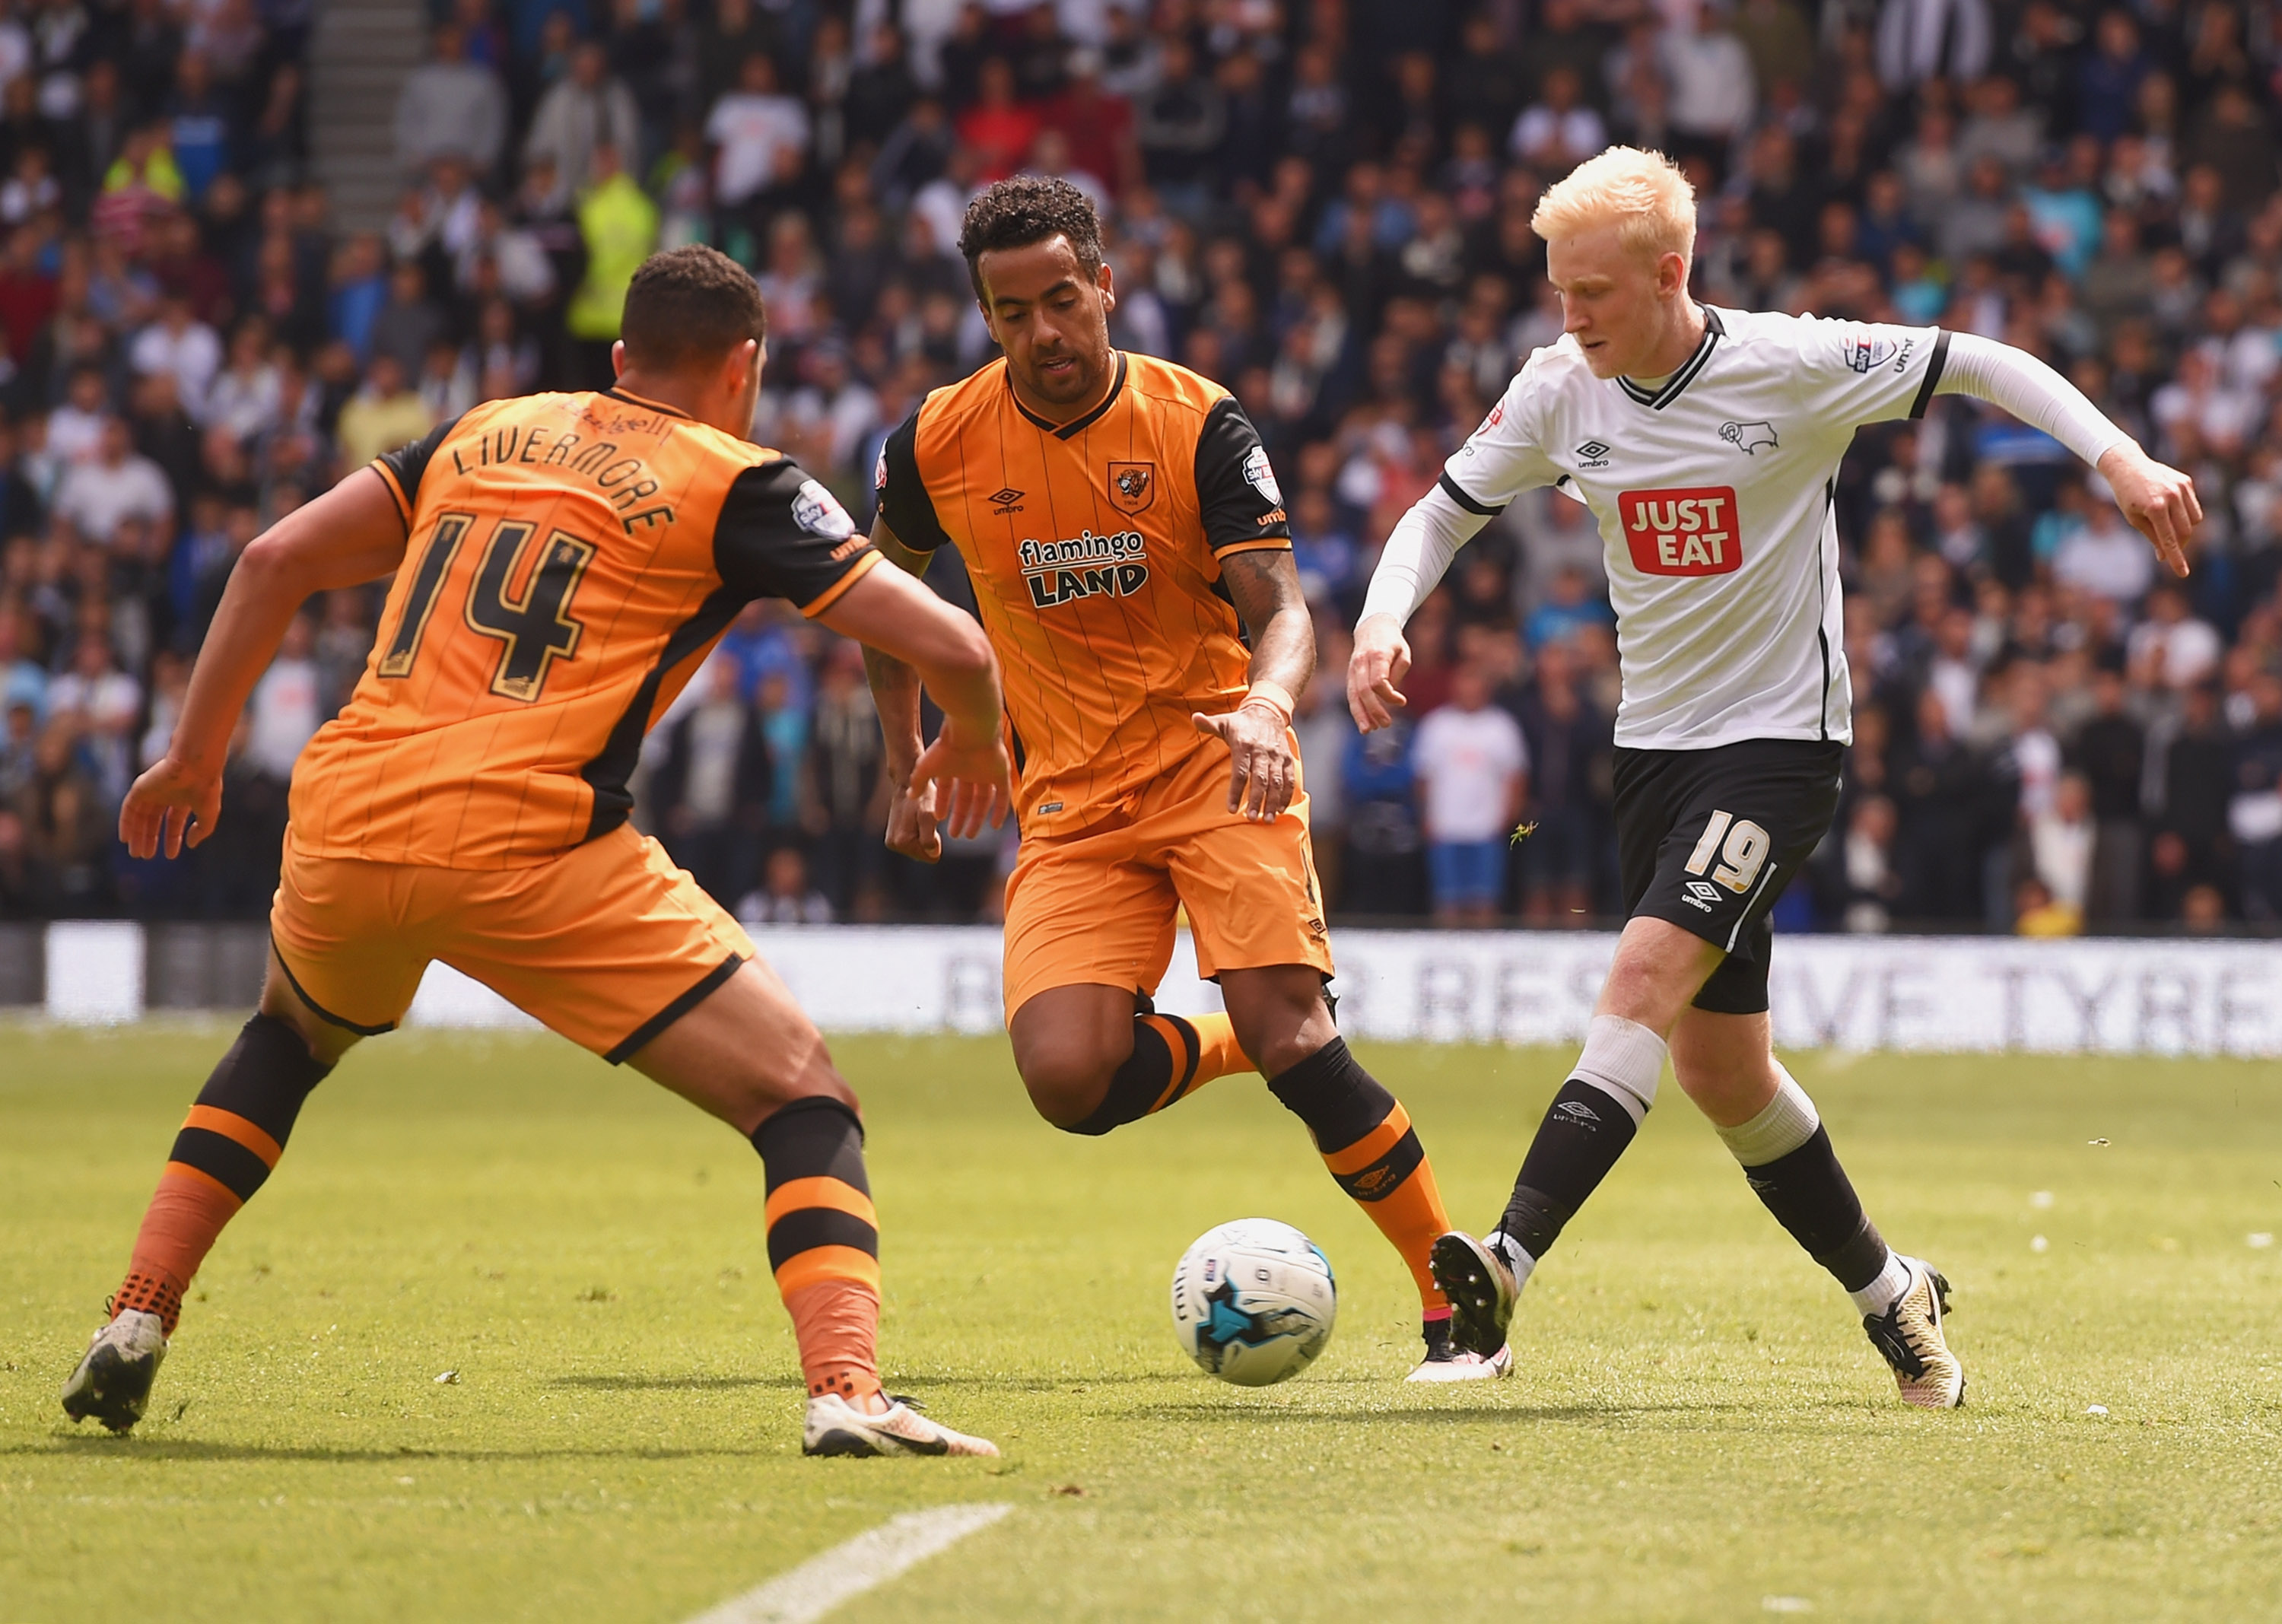 Crystal Palace close in on Watford outcast Will Hughes as the Patrick Vieira rebuild continues at Selhurst Park